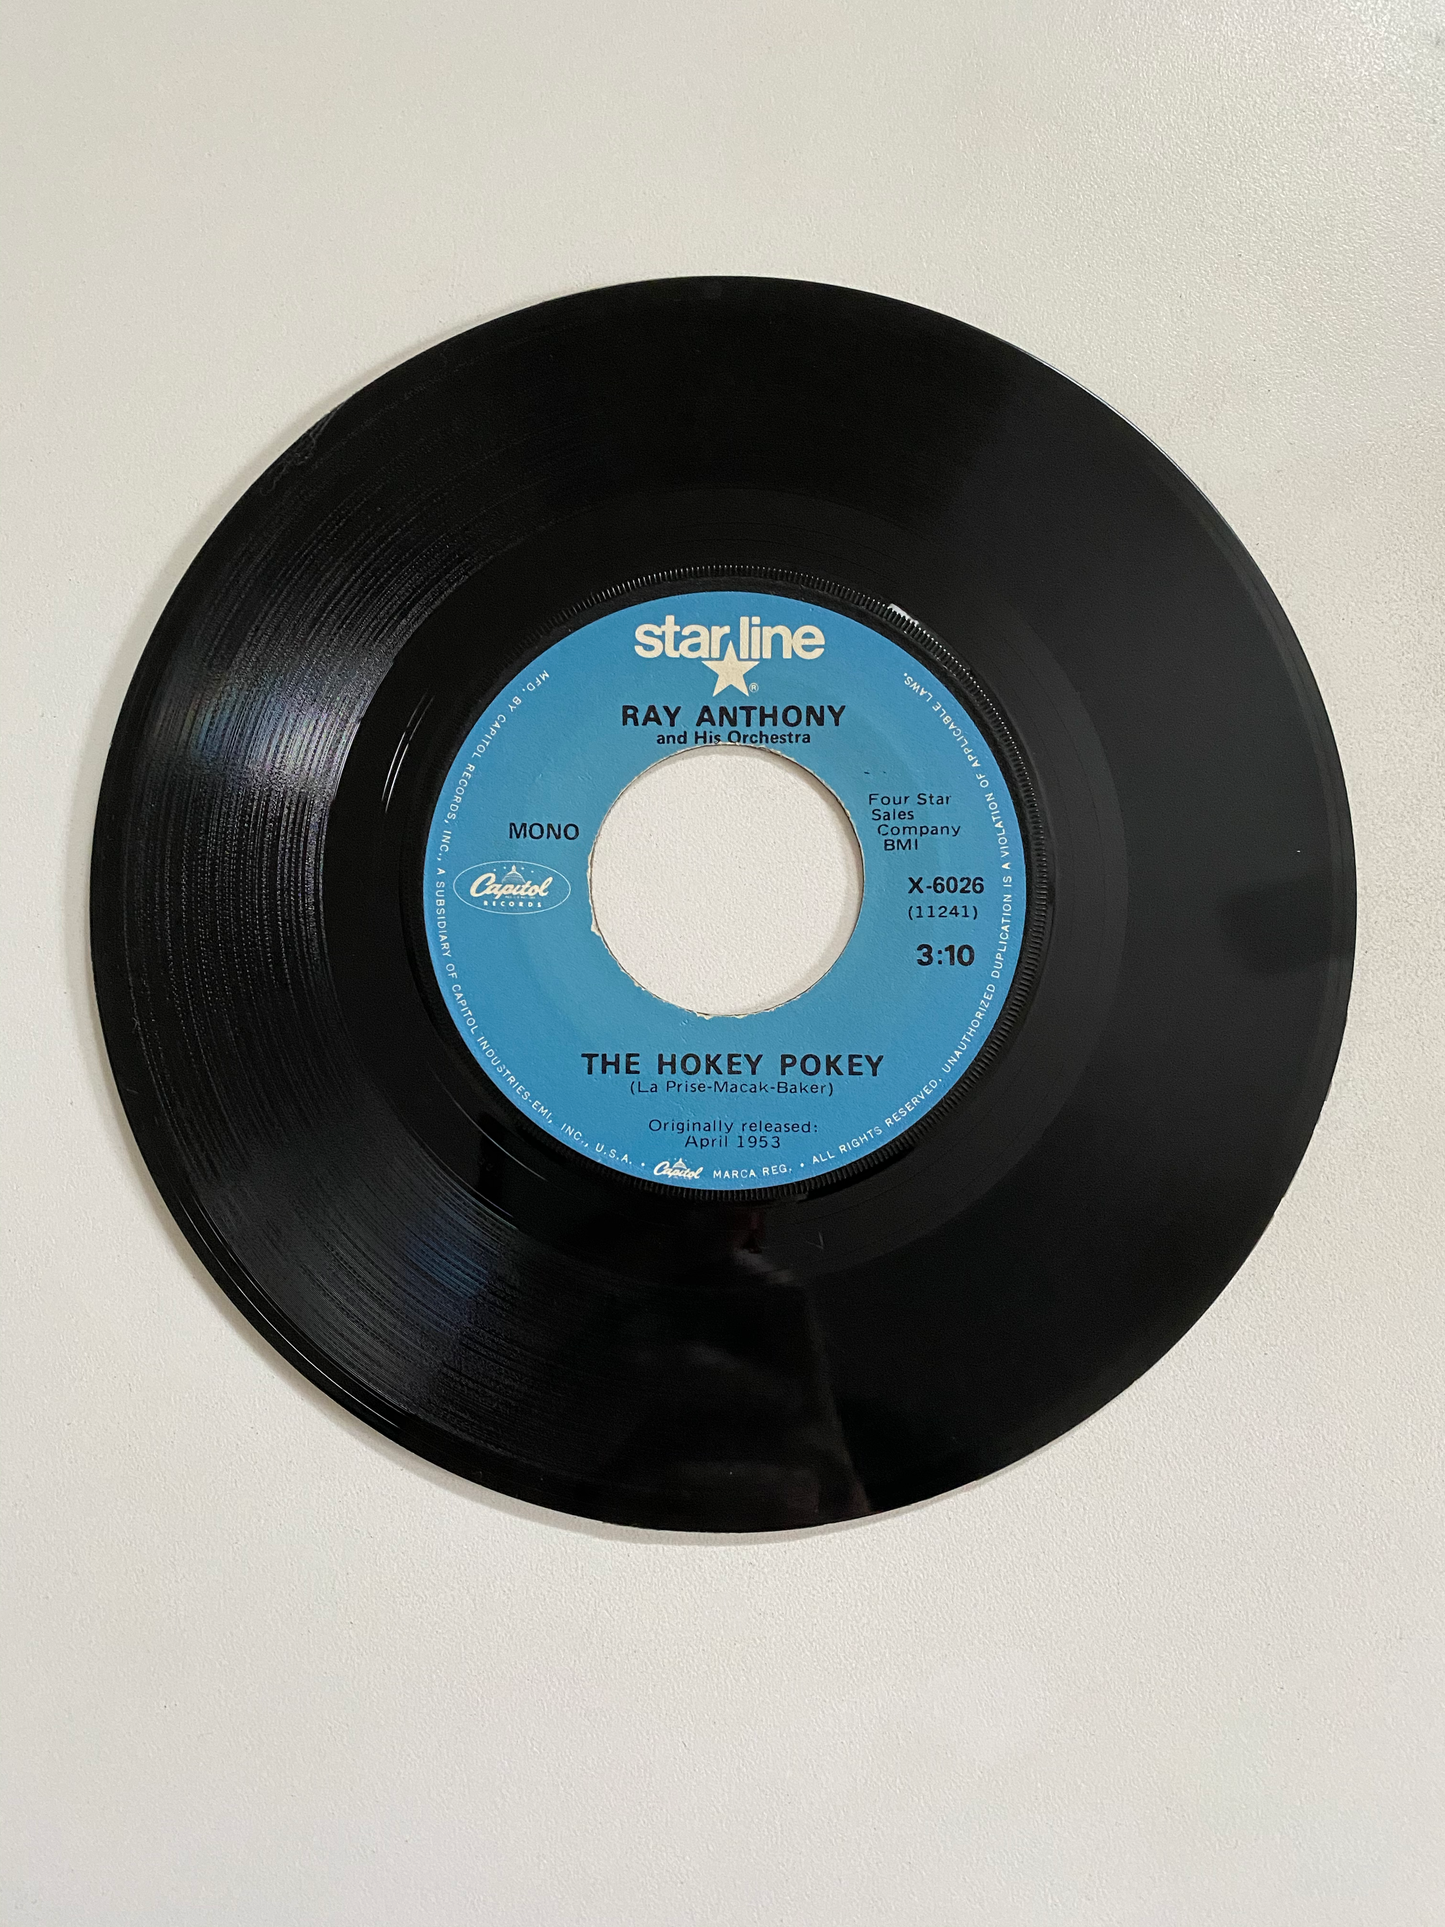 Ray Anthony and his Orchestra - The Bunny Hop | 45 The Vintedge Co.